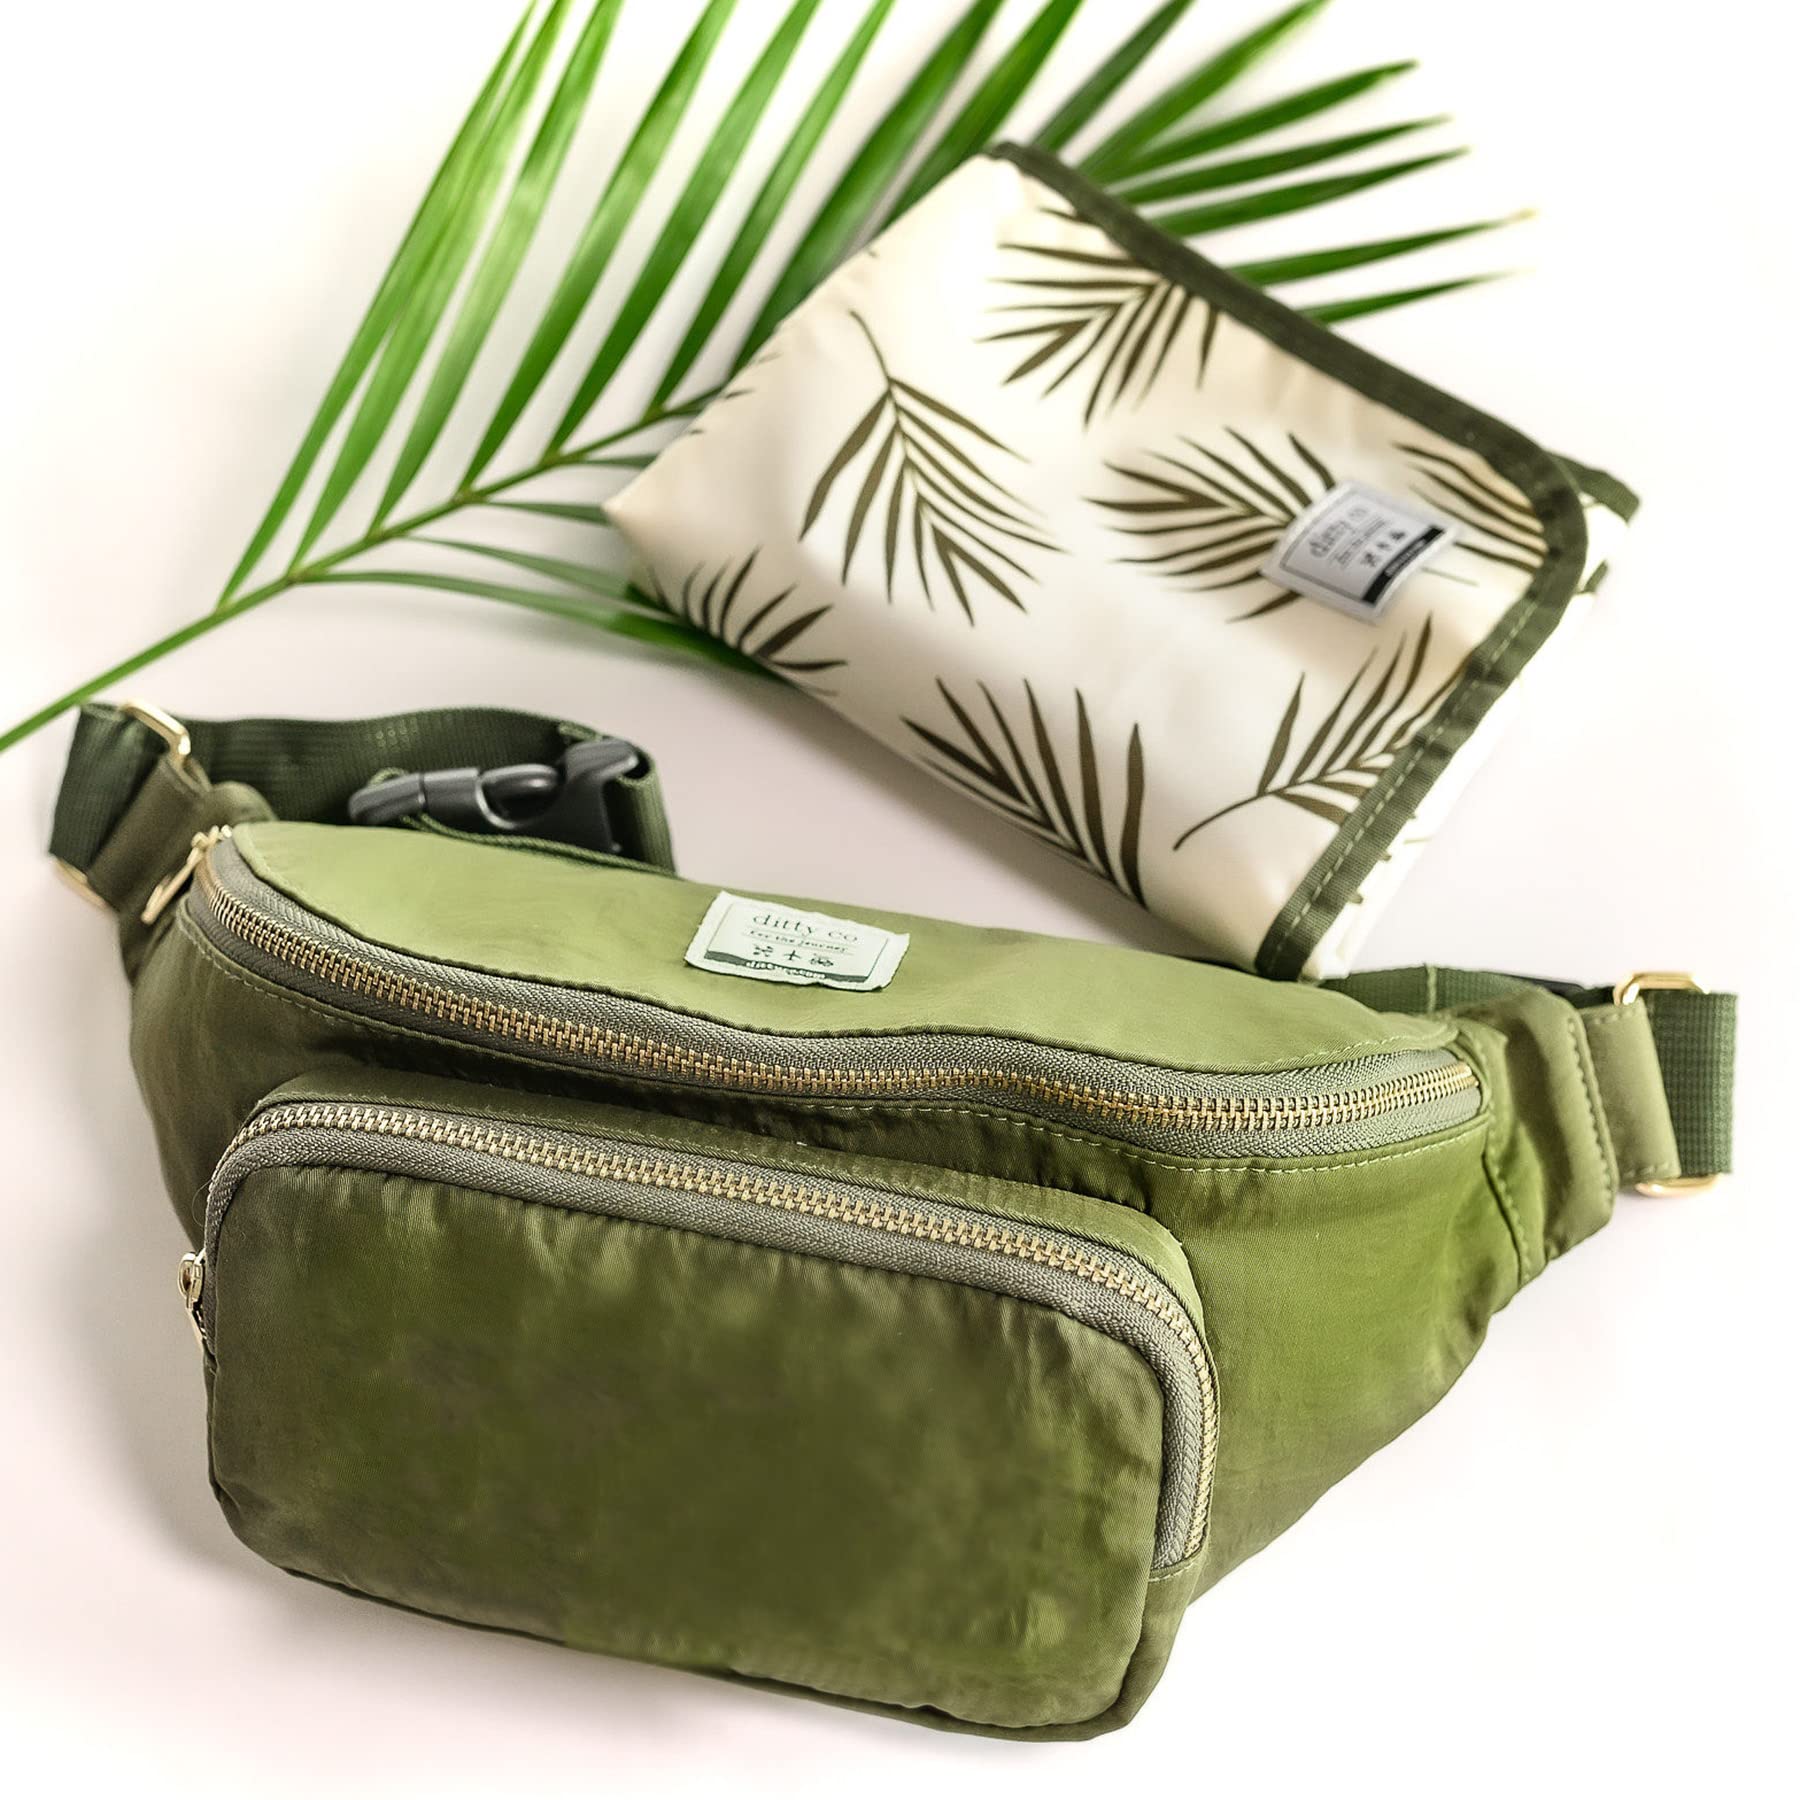 Ditty Co. Small Diaper Bag - Portable Changing Pad - Crossbody Bags For Women - Baby Wipe Holder - Baby Travel Essentials (Olive Green)